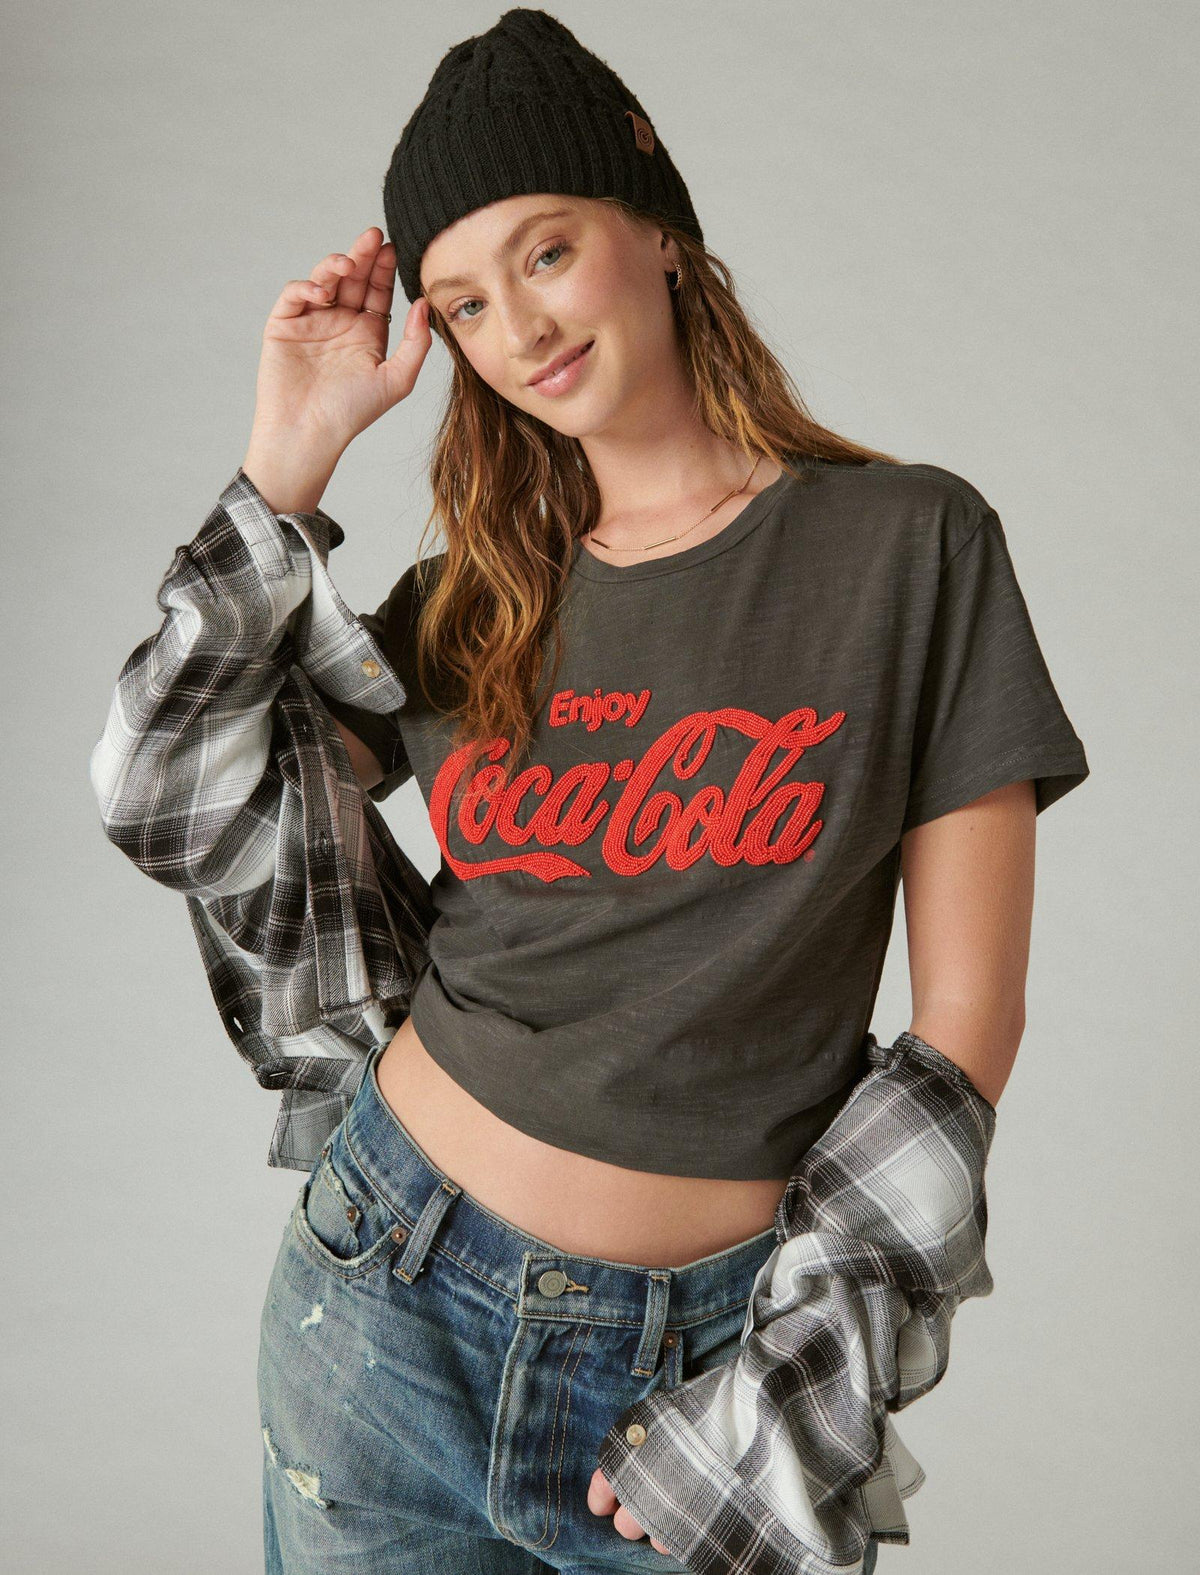 Lucky Brand Coca Cola Logo Tee - Women's Clothing Tops Shirts Tee Graphic T Shirts Raven